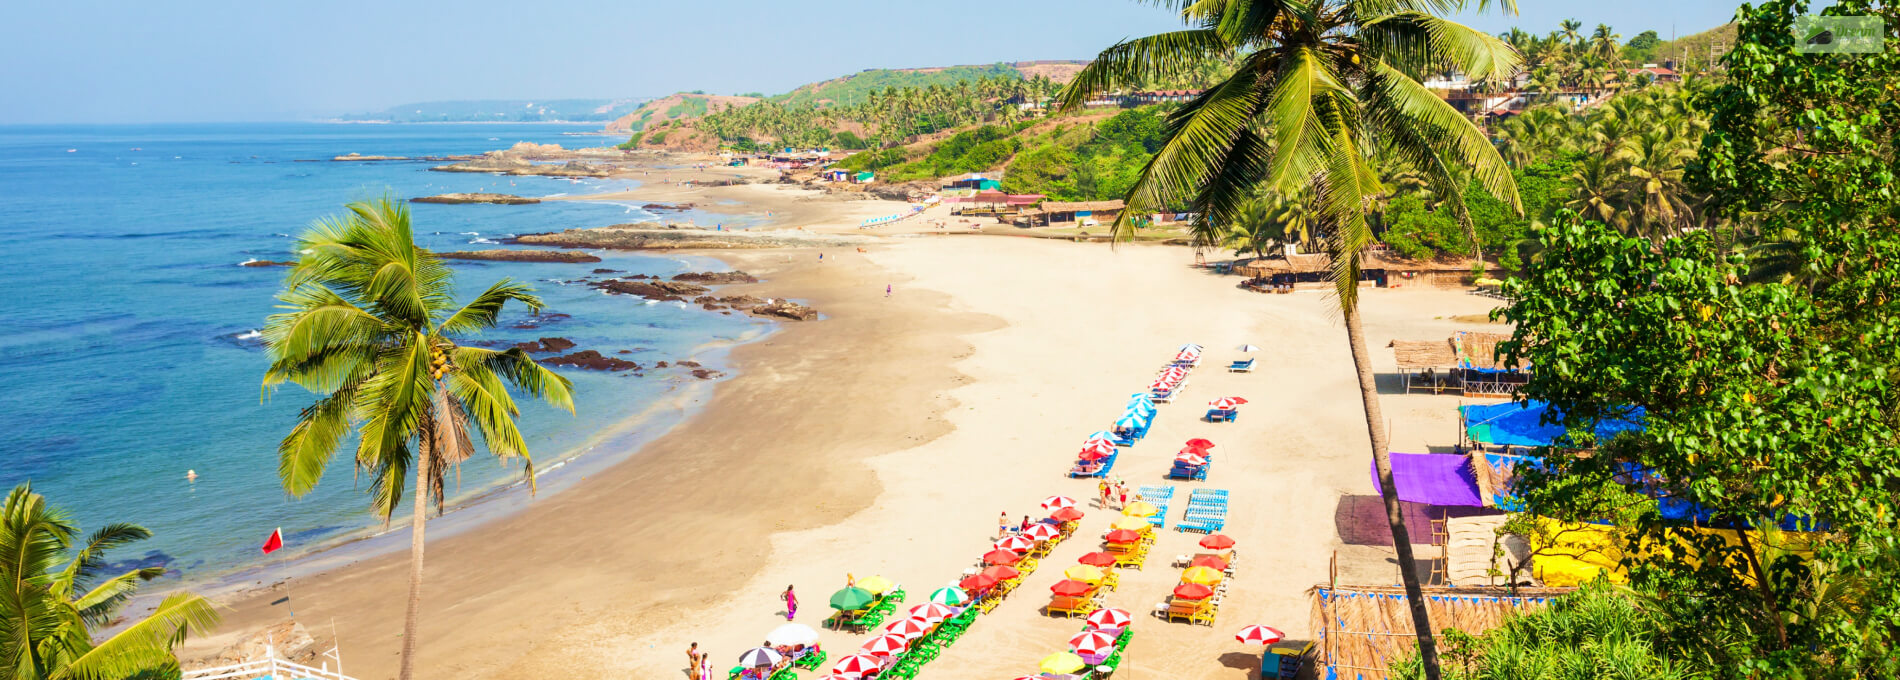 Visiting Calangute Beach Goa Here’s What You MUST Know Before Reaching The Queen Of Beaches!